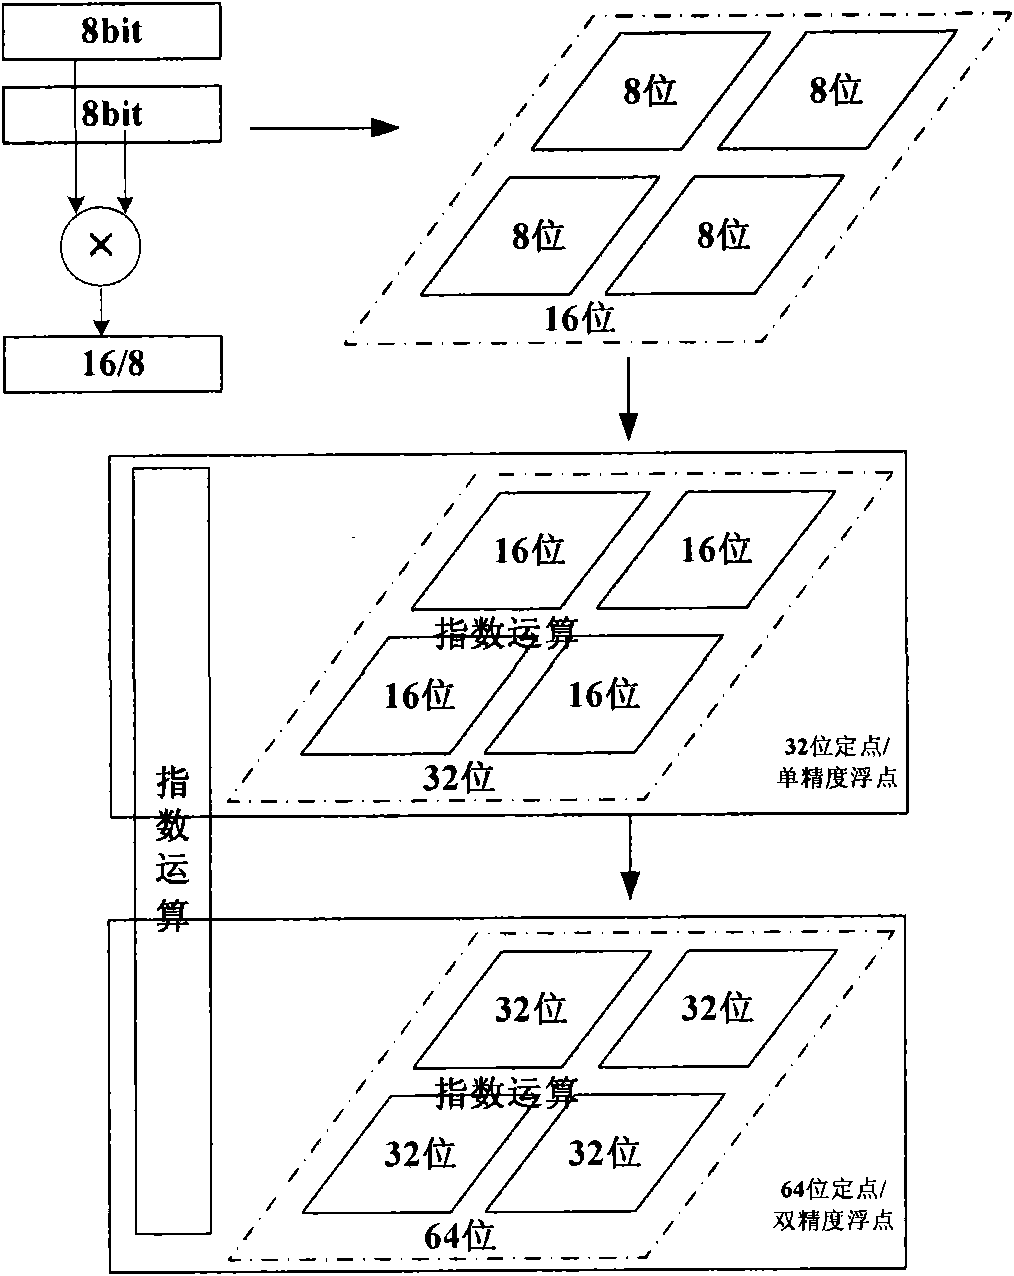 64-bit fixed and floating point multiplier unit supporting complex operation and subword parallelism